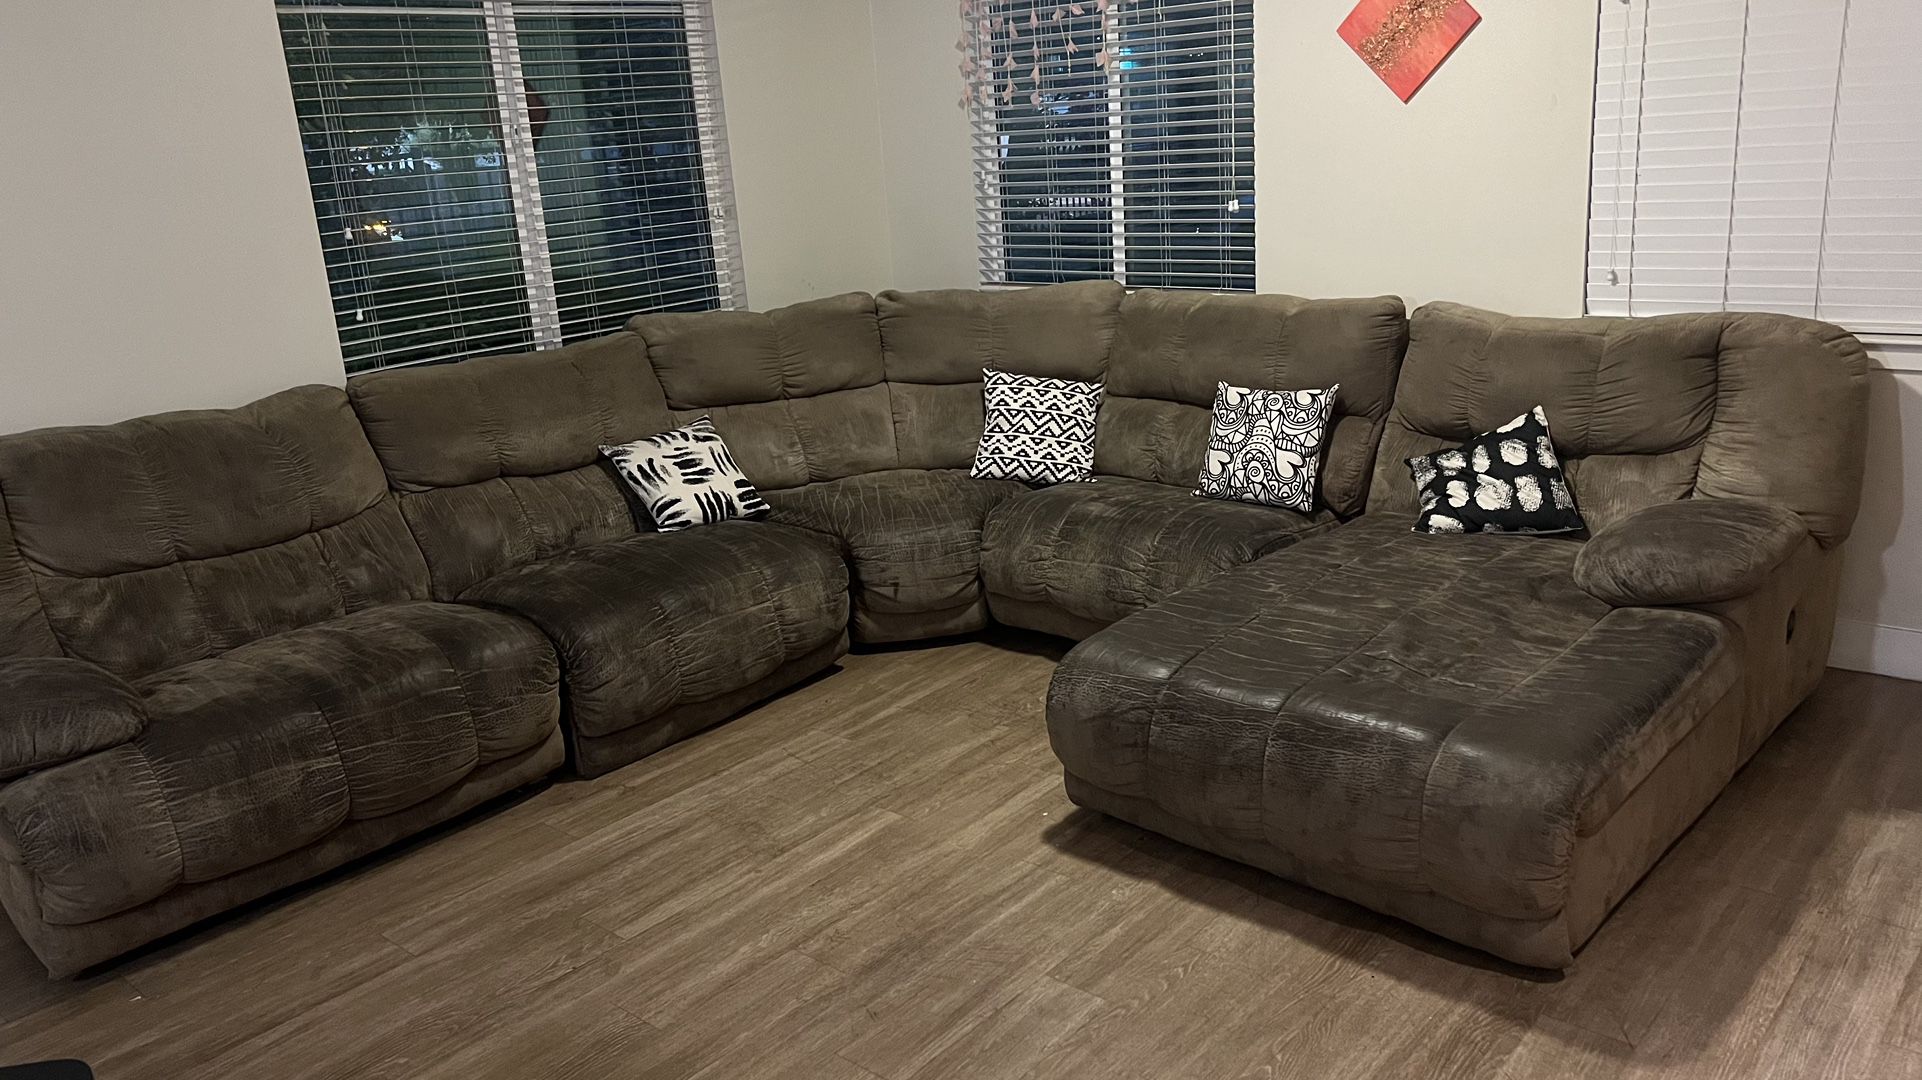 Sofa with Recliner